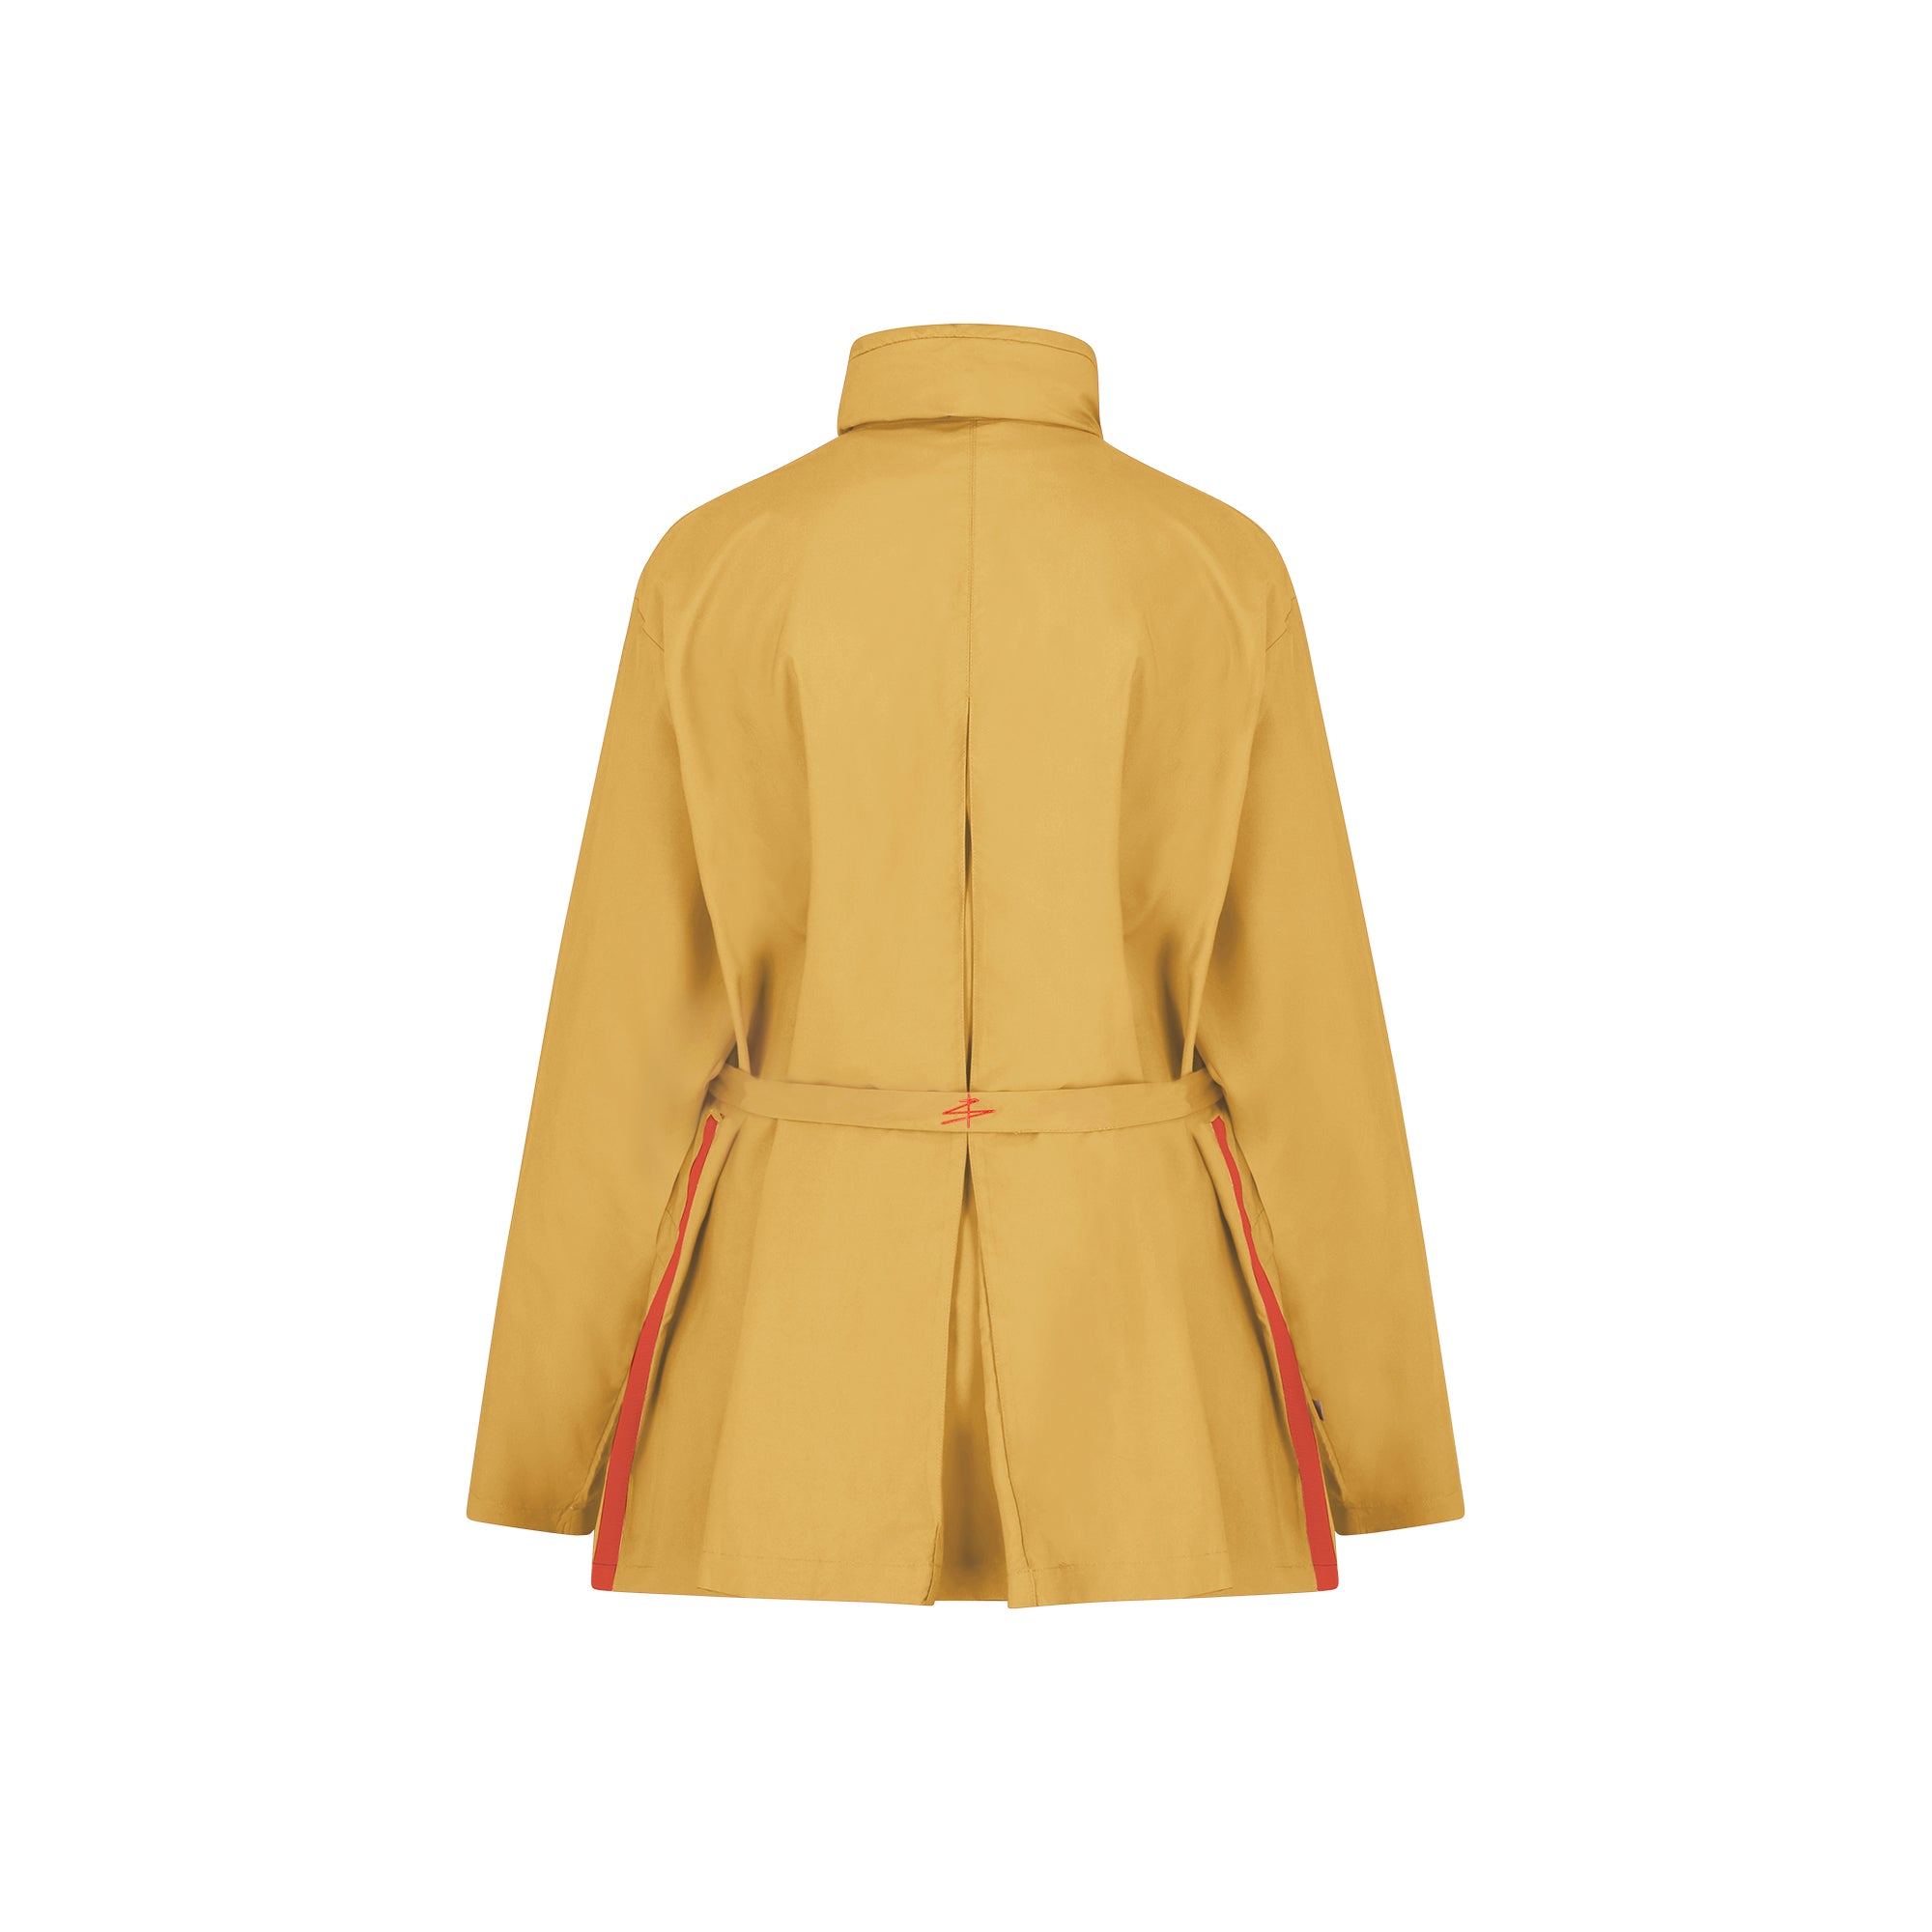 Bise raincoat - Curry color - back view